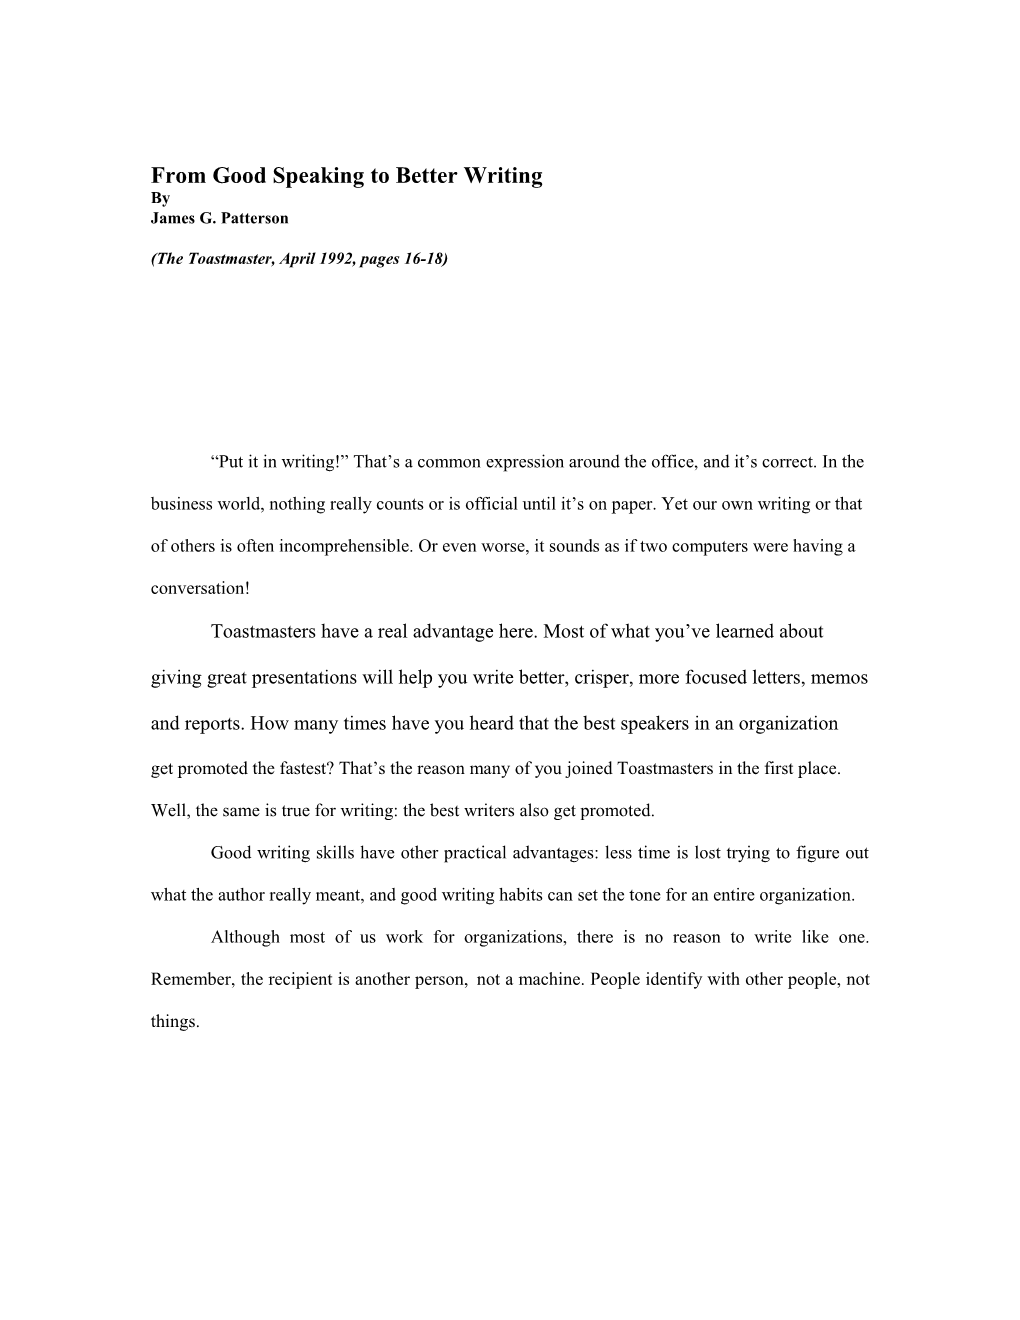 From Good Speaking to Better Writing